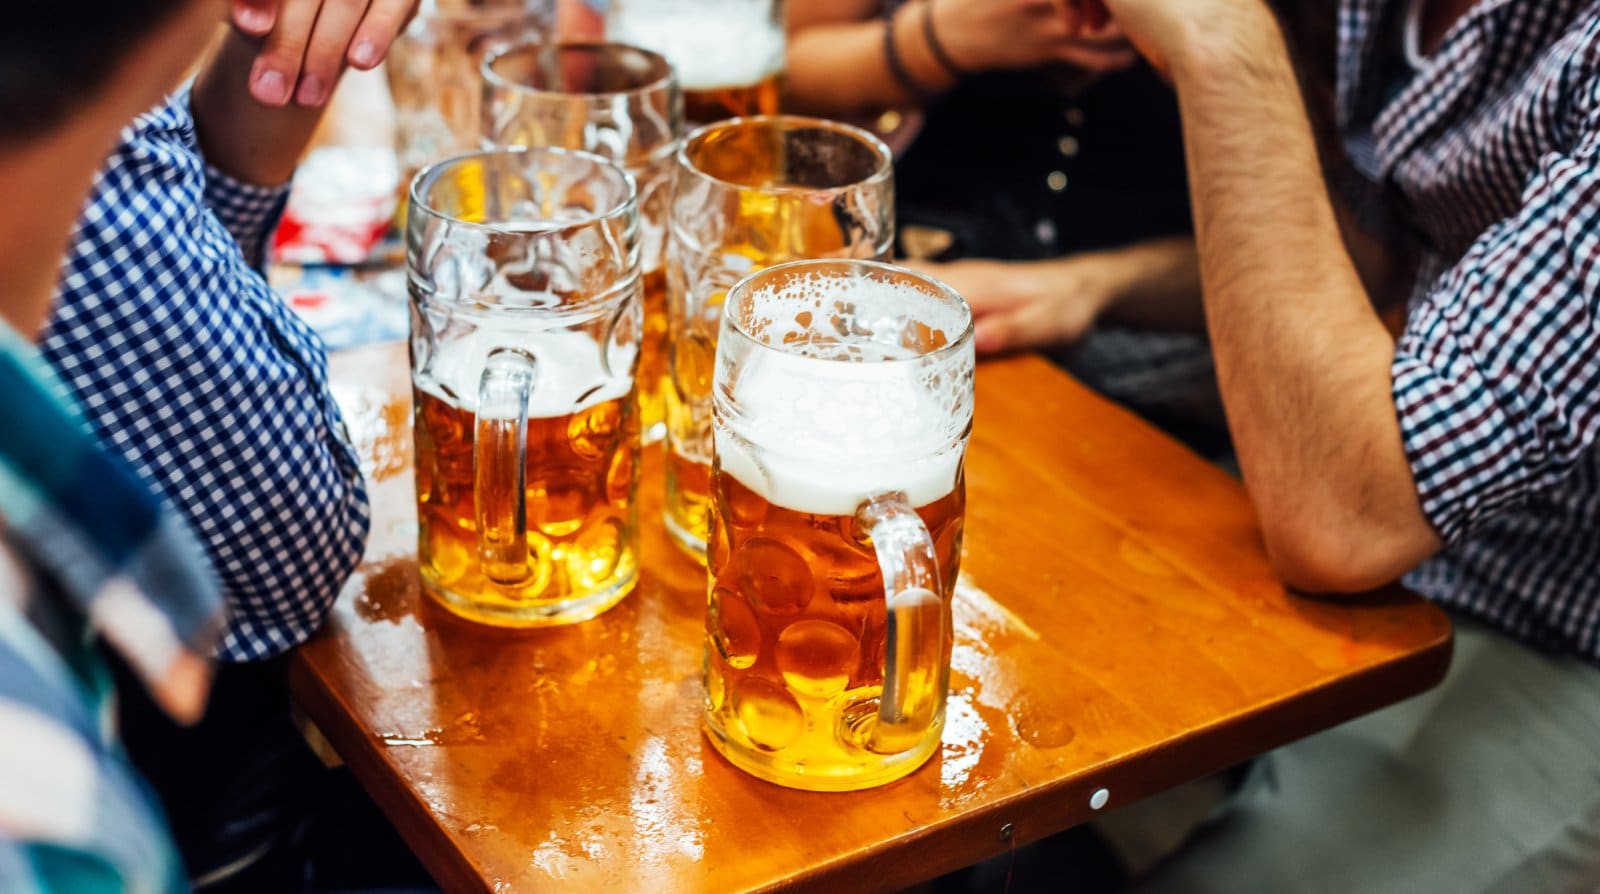 <p class="wp-caption-text">Image Credit: Shutterstock / katjen</p>  <p>Prague is a beer lover’s paradise, where a pint of the local brew can be as cheap as 30 Czech koruna ($1.30). Compare that to the $5-$7 you’d pay in a U.S. bar for an imported beer of similar quality.</p>